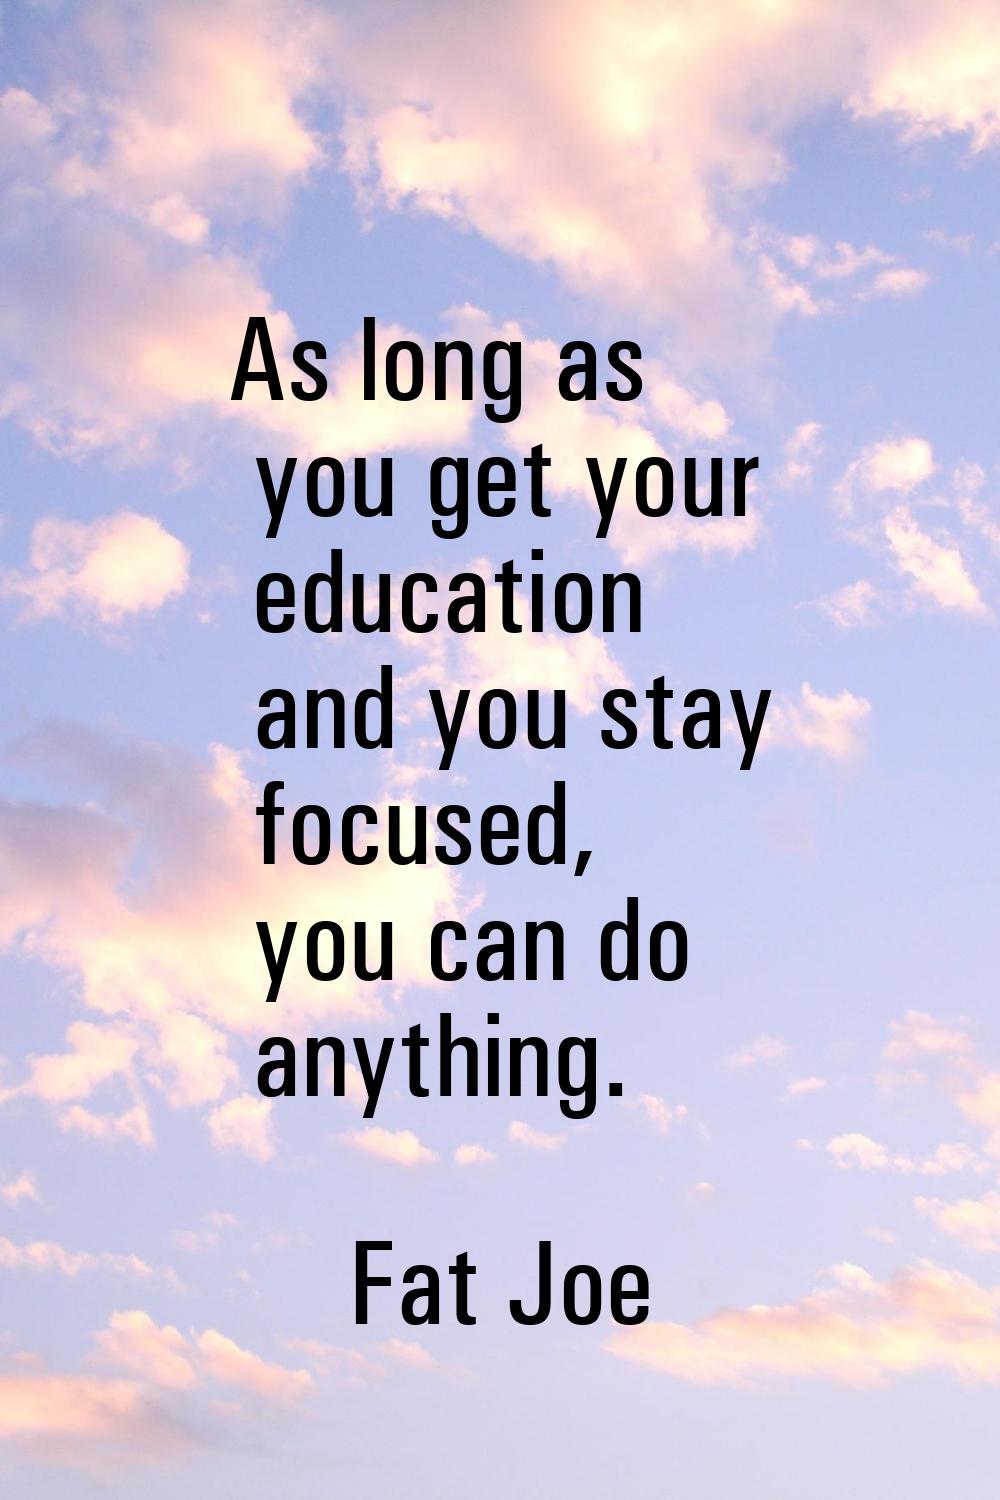 As long as you get your education and you stay focused, you can do anything.